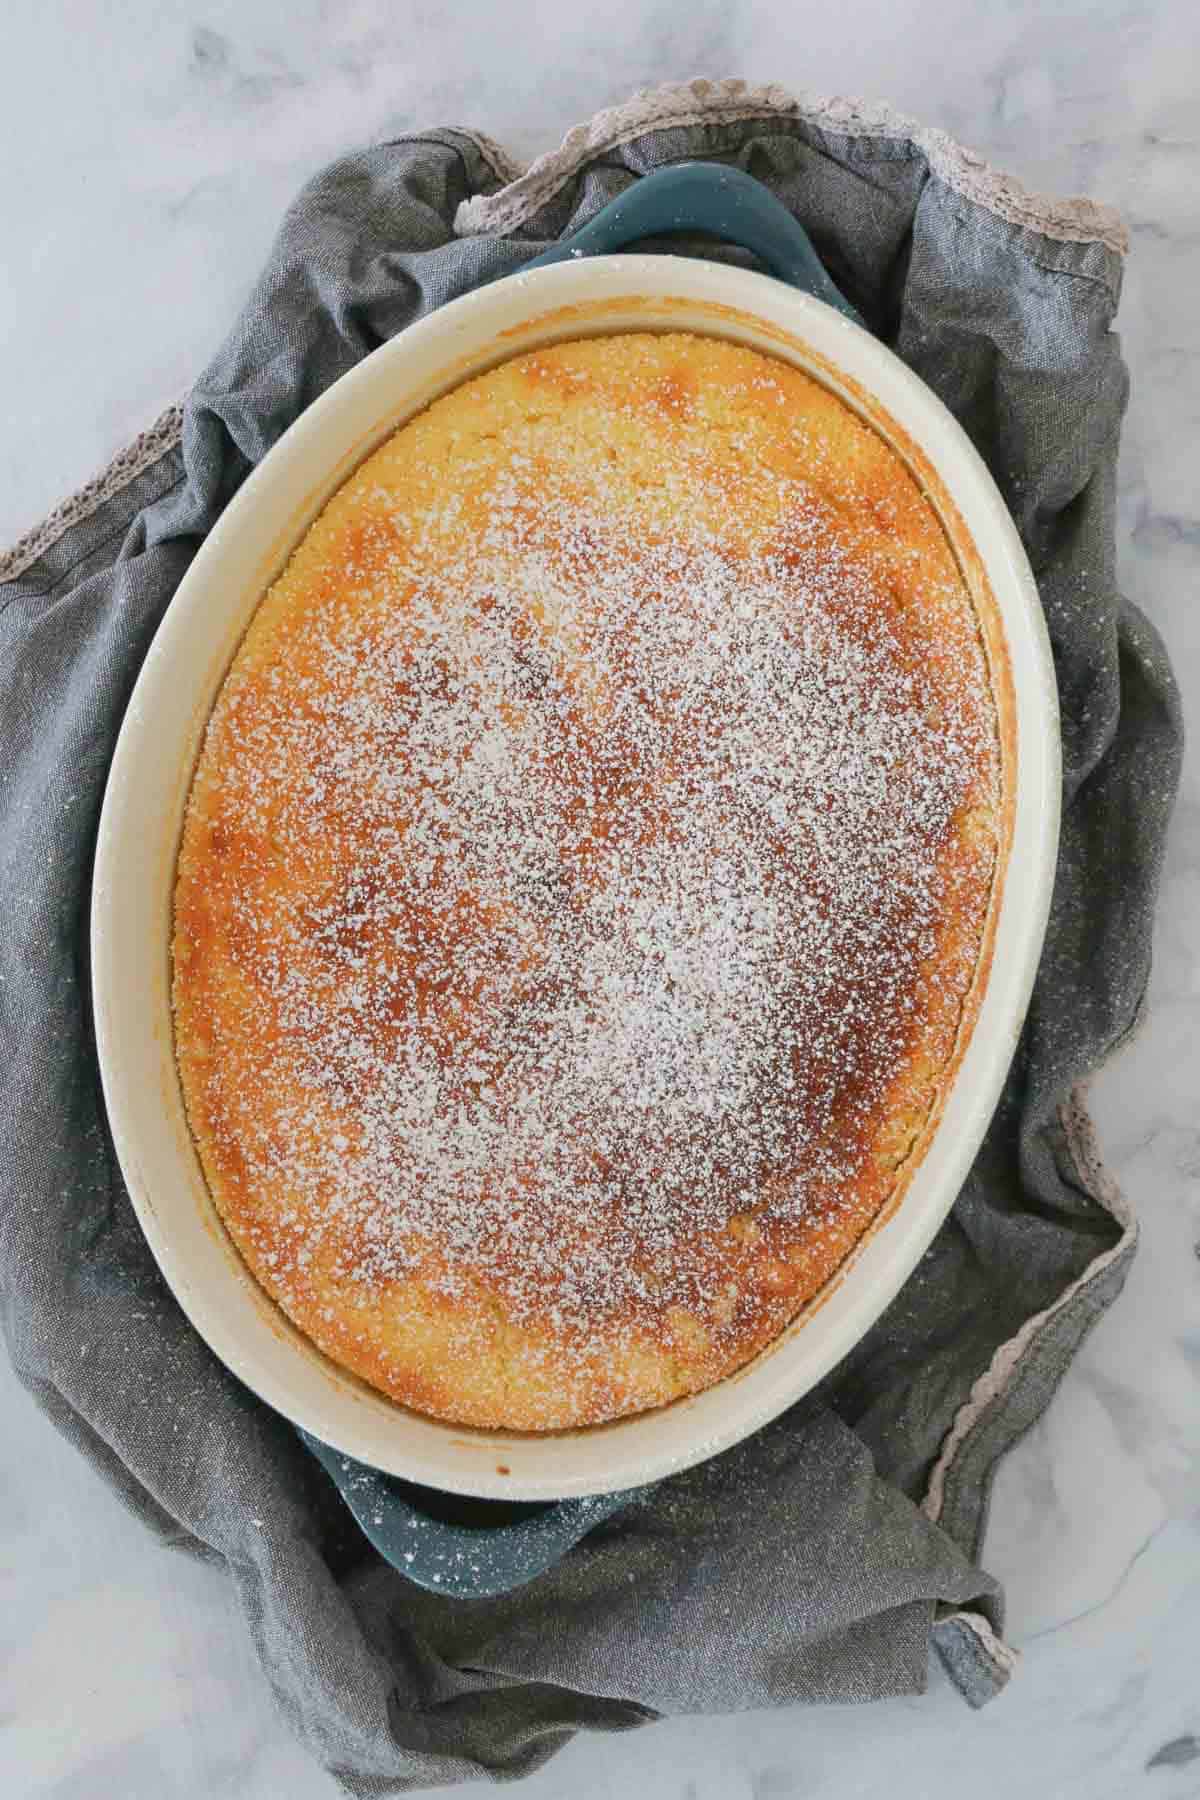 Looking down on a golden baked lemon delicious pudding, dusted with icing sugar.